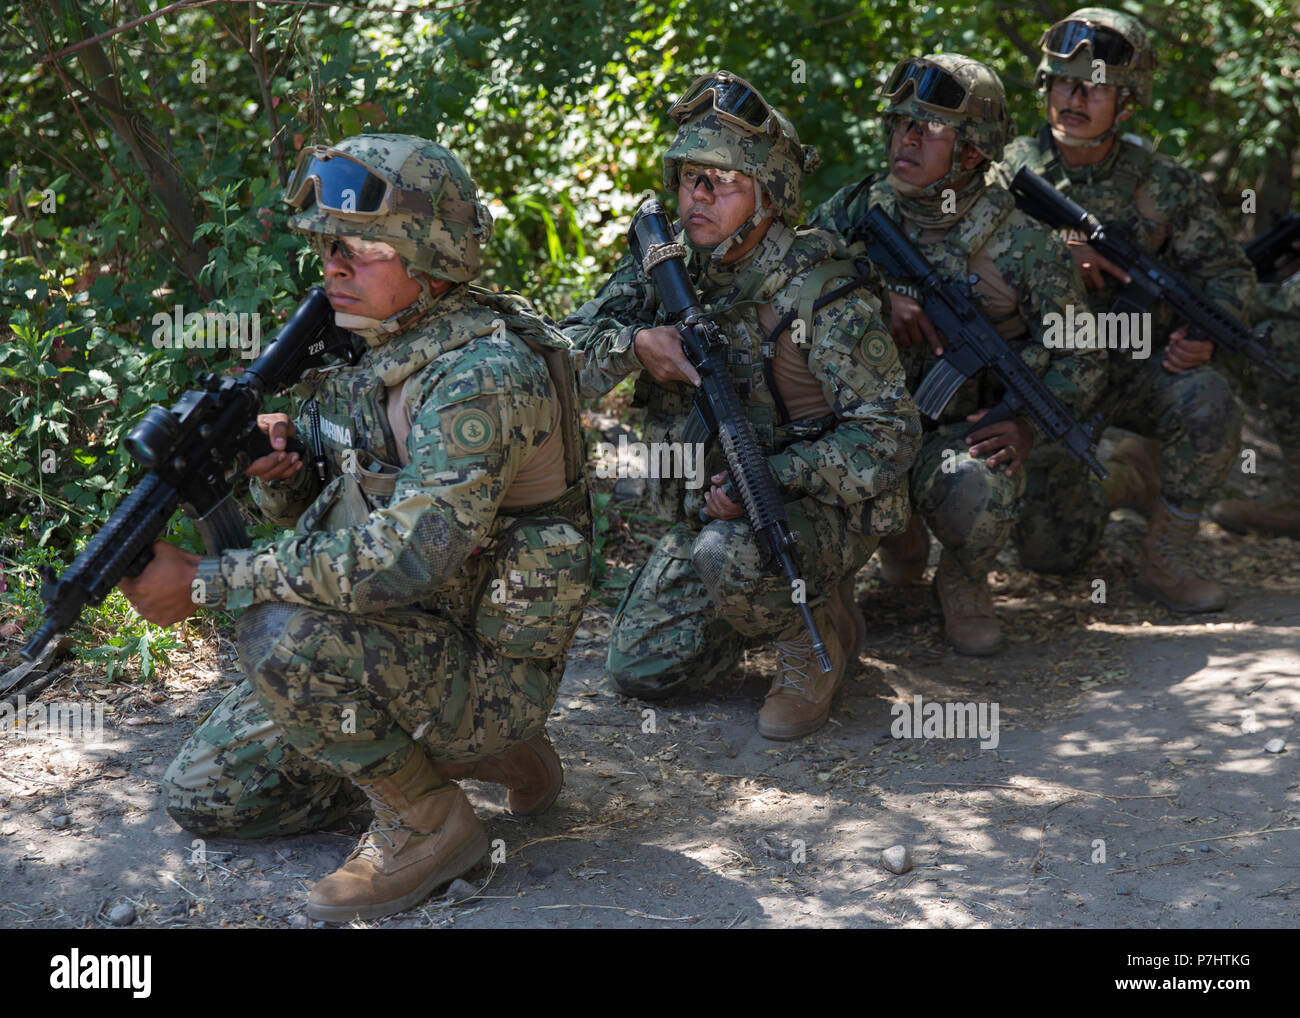 180703-M-WI555-0045 MARINE CORPS BASE CAMP PENDLETON, Calif. (July 3, 2018) Mexican marines with Marine Amphibious Infantry Brigade demonstrate security observation procedures before advancing to a live-fire range during Rim of the Pacific (RIMPAC) exercise at Marine Corps Base Camp Pendleton, California, July 3, 2018. RIMPAC demonstrates the value of amphibious forces and provides high-value training for task-organized, highly-capable Marine Air-Ground Task Forces enhancing the critical crisis response capability of U.S. forces and partners globally. Twenty-five nations, 46 ships, five submar Stock Photo